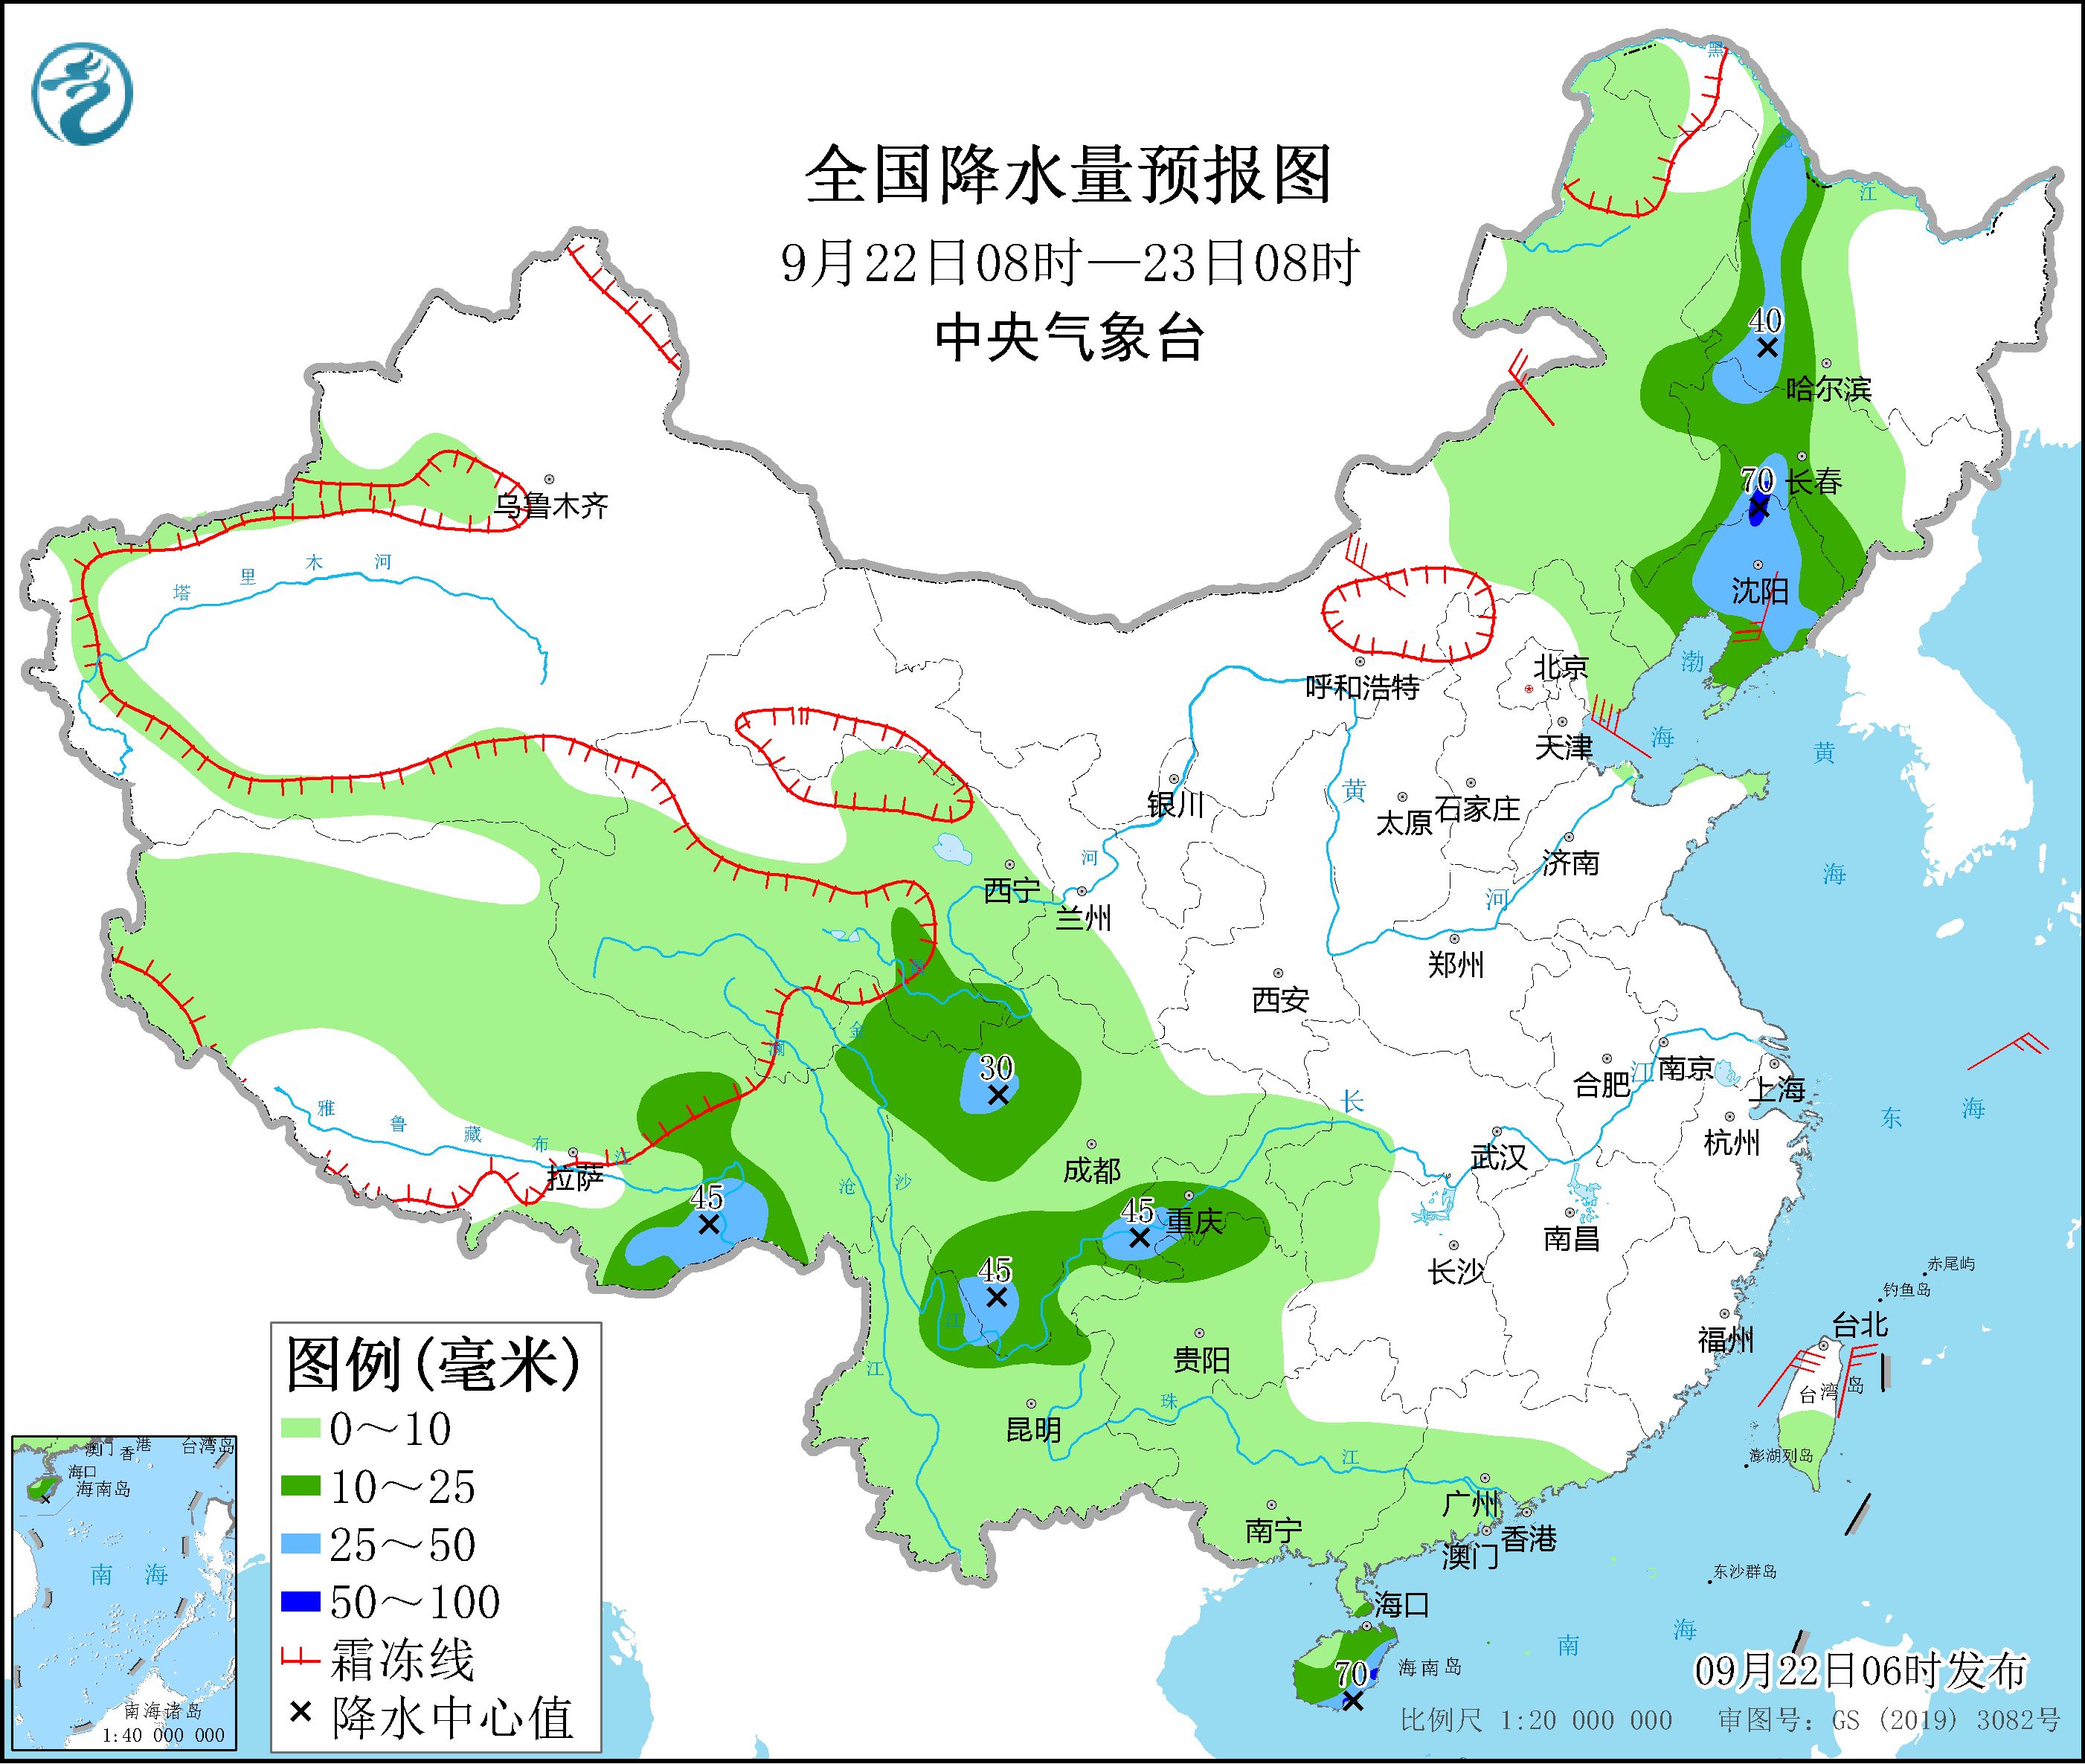 Heavy rainfall in southwest China and cold air affect northern China